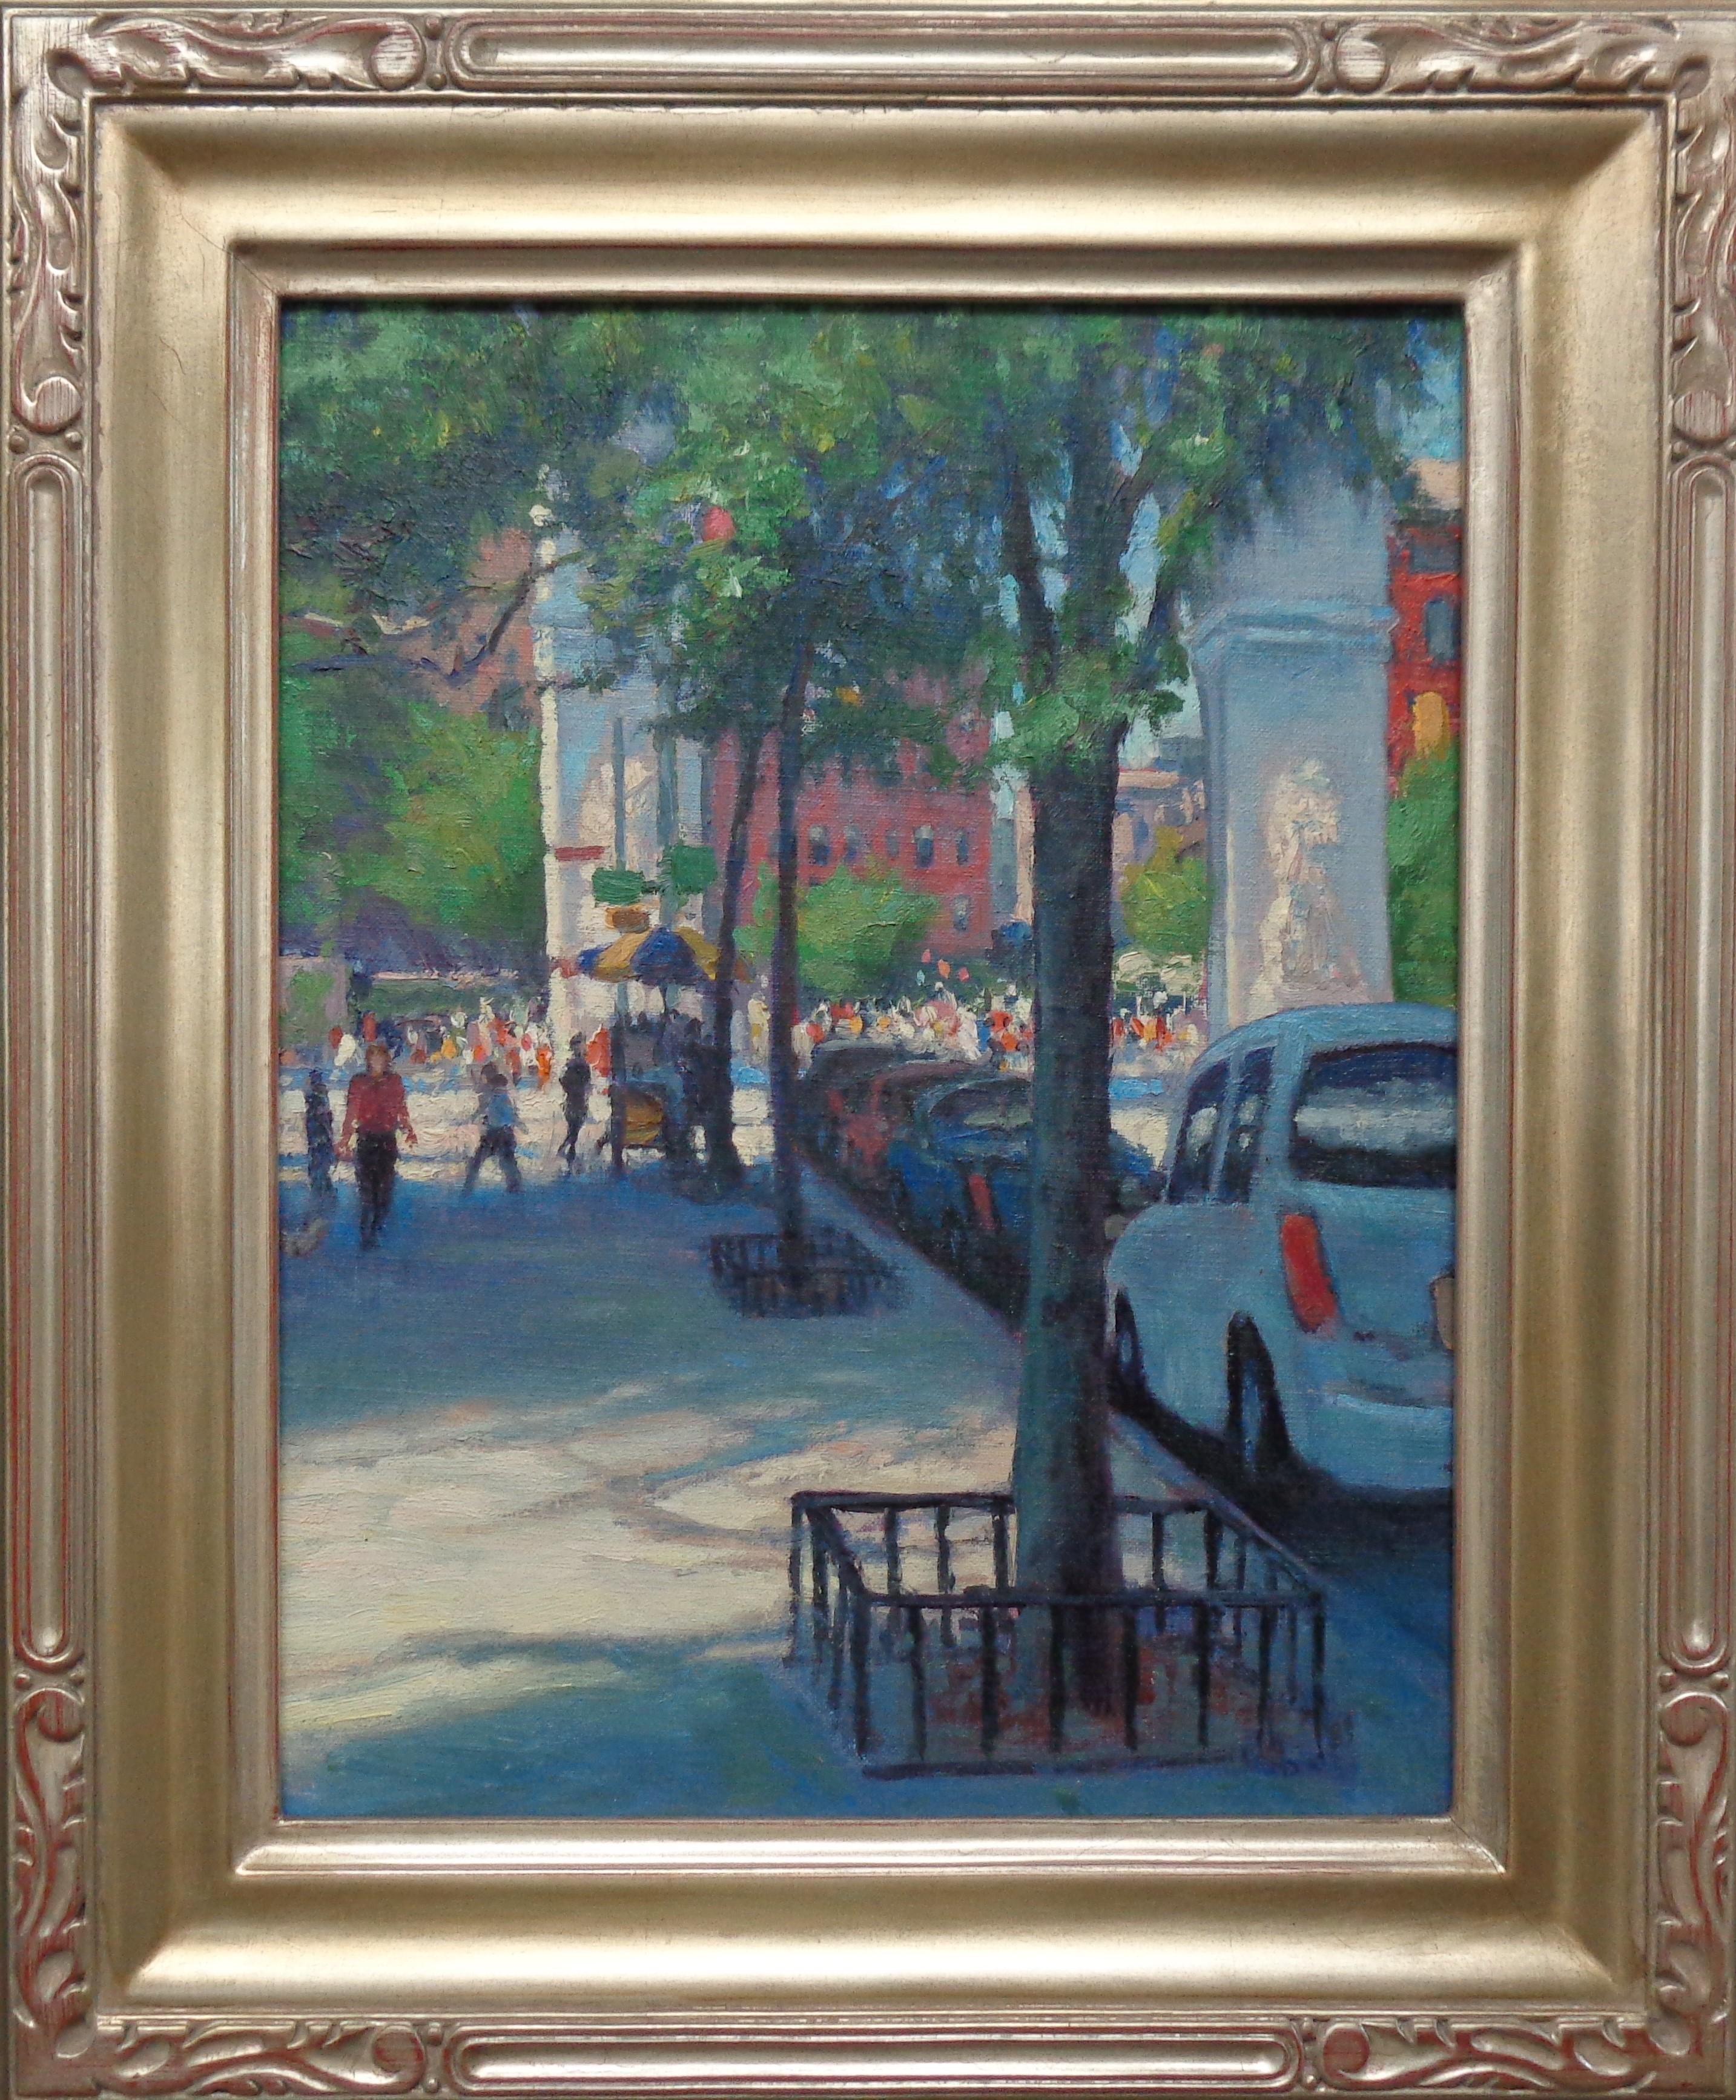 Washington Square Spring
oil/panel
14 x 11 unframed, 18.5 x 15.5 framed
Washington Square Spring is a plein air oil painting on canvas panel by award winning contemporary artist Michael Budden painted on site in NYC on Fifth Avenue just below the